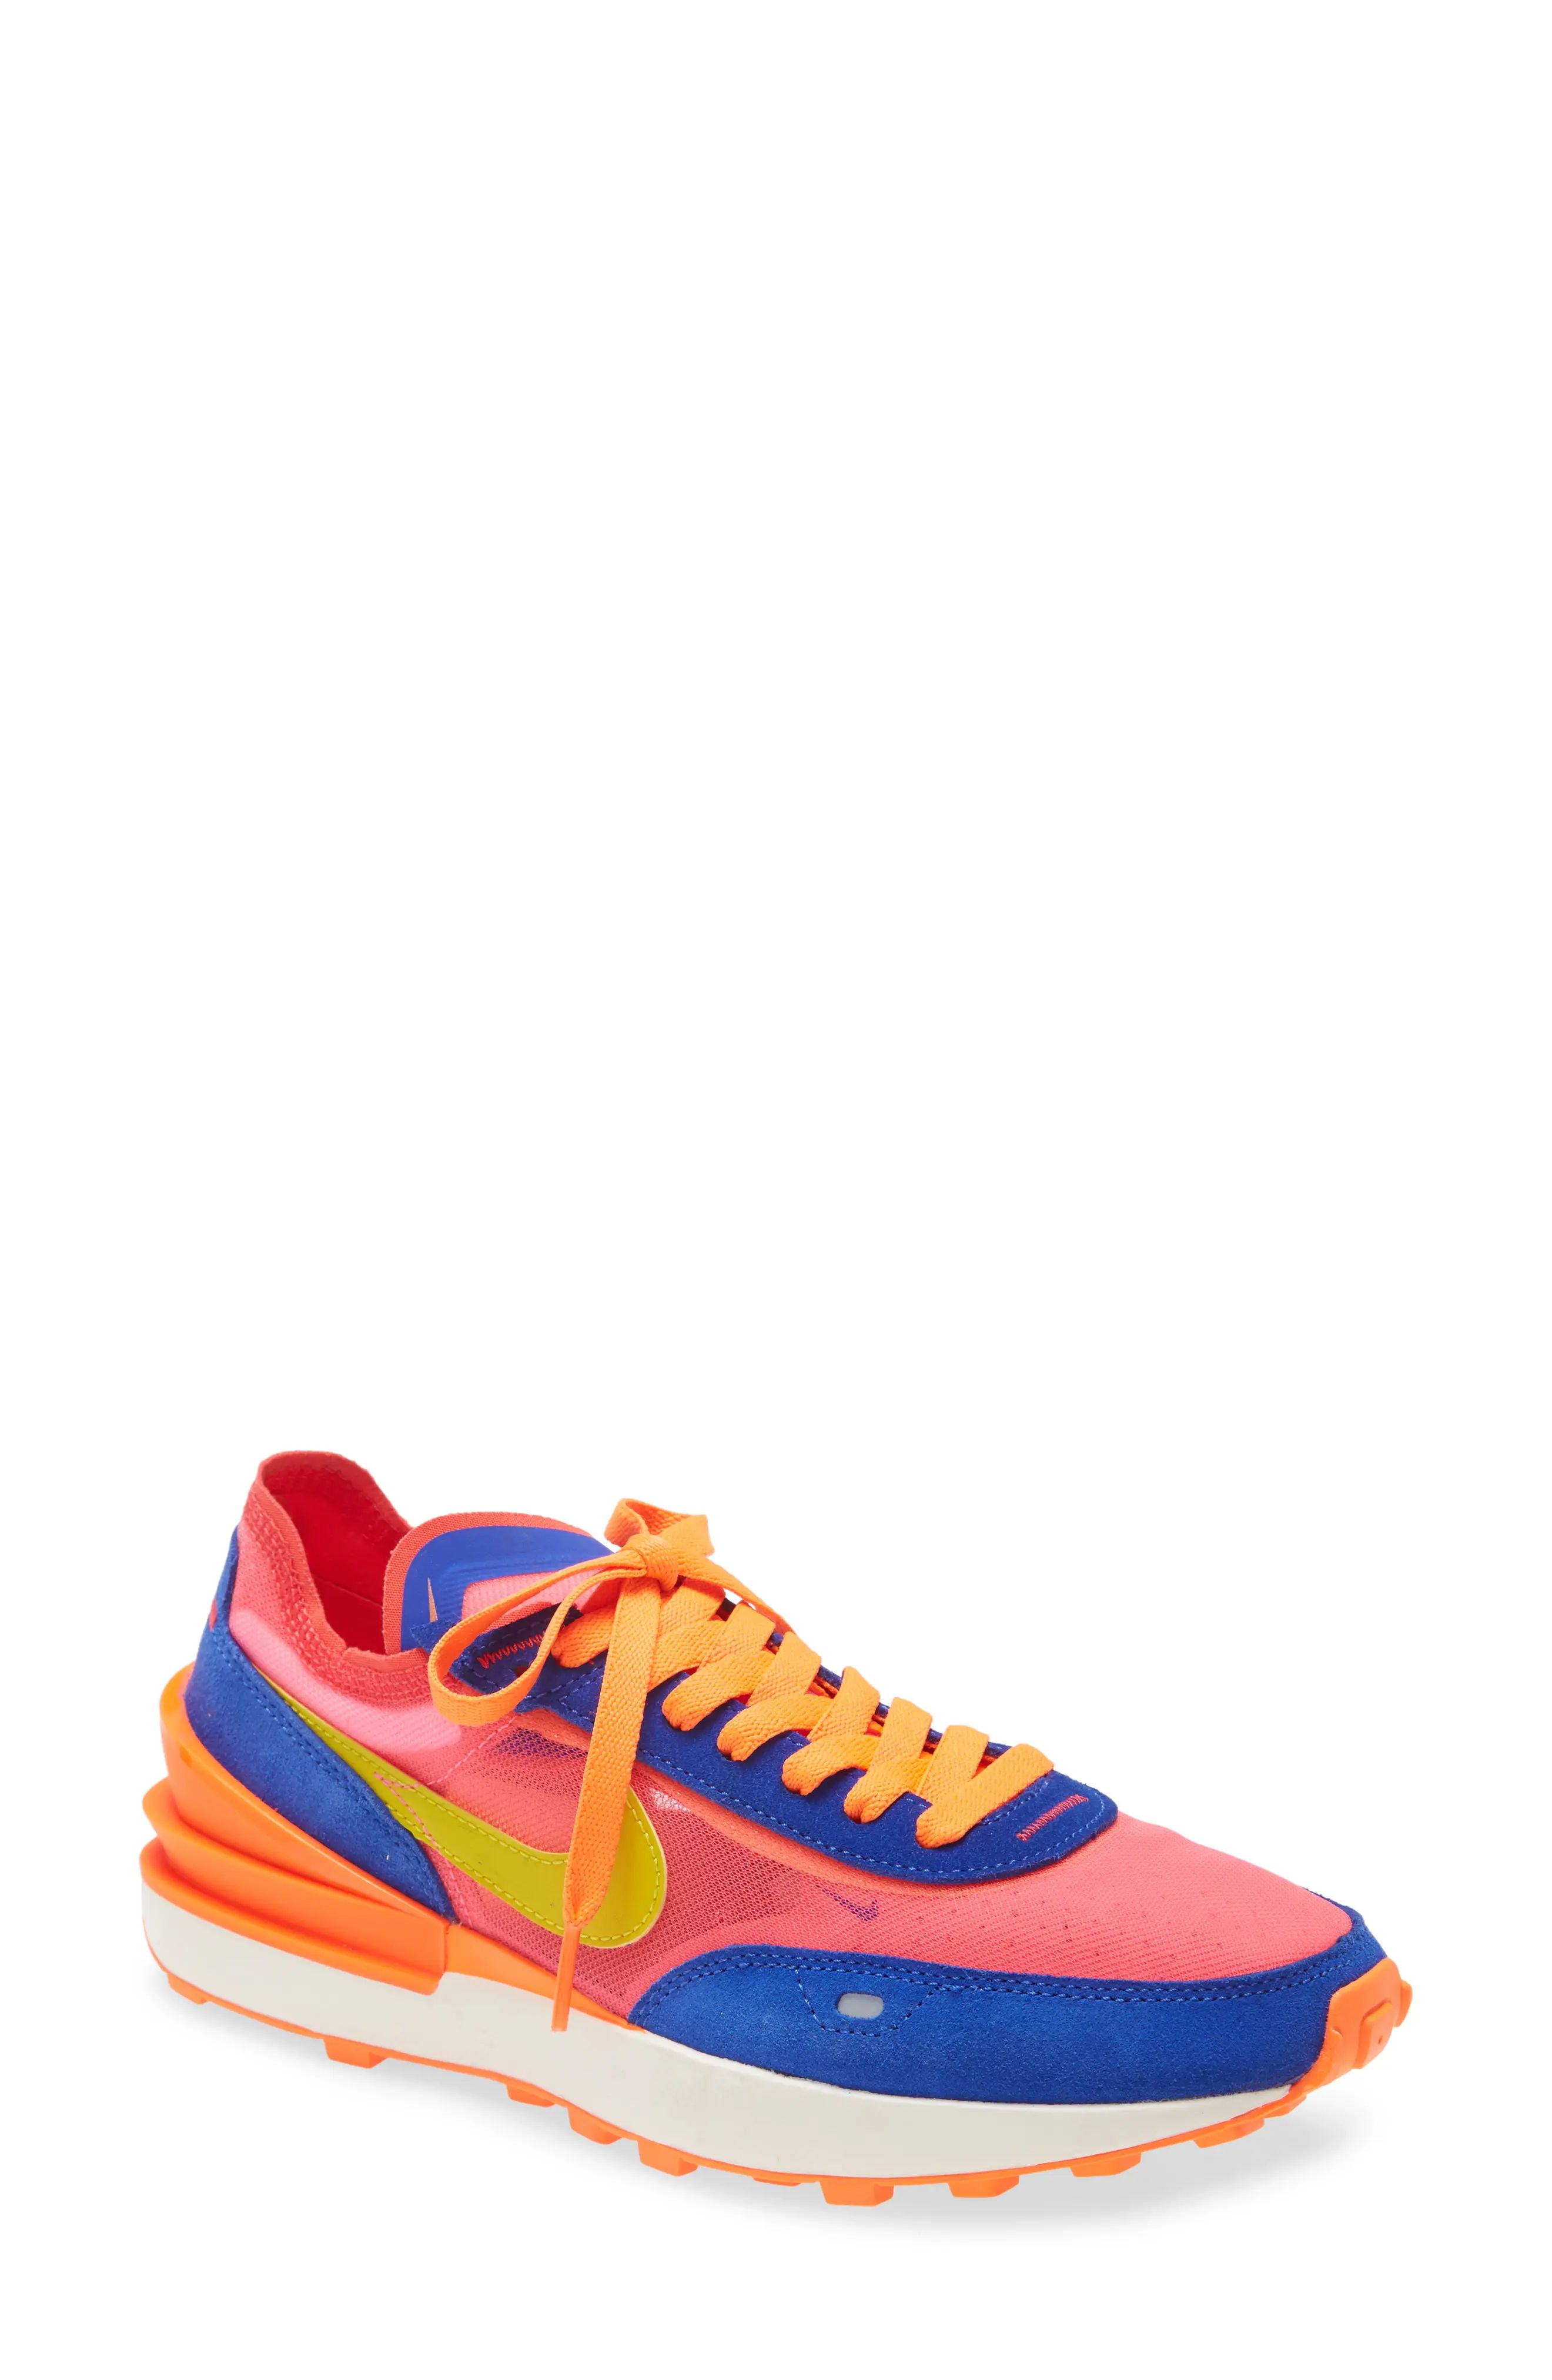 Nike Waffle One Sneaker, Size 11.5 in Racer Blue/Citron/Hyper at Nordstrom | Nordstrom